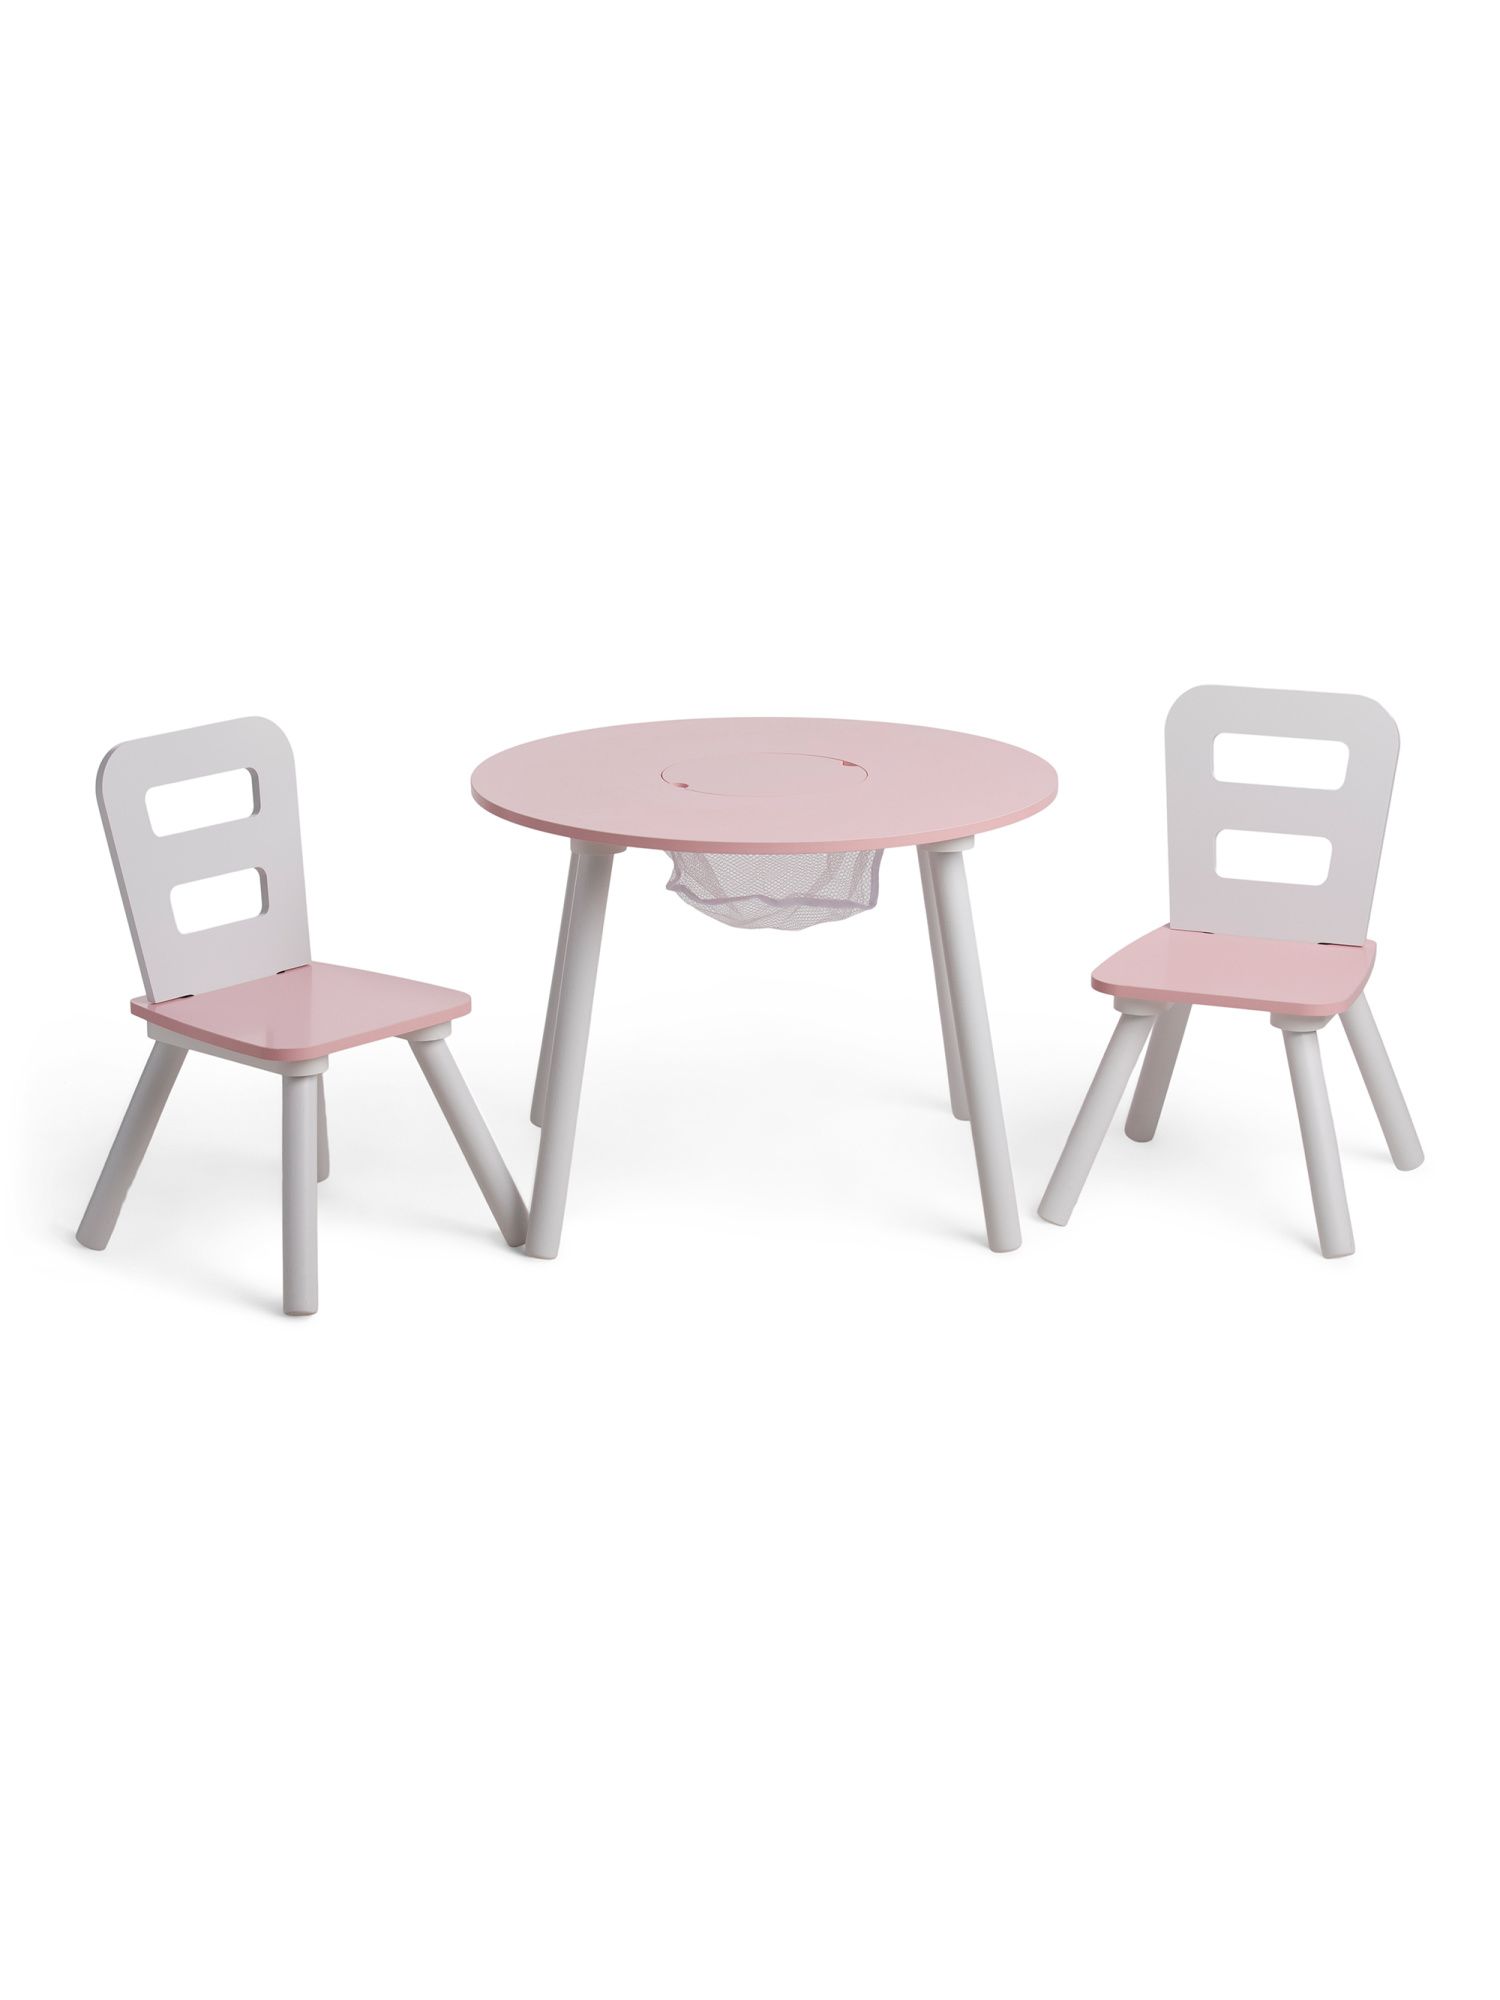 Round Table And 2 Chair Set | TJ Maxx